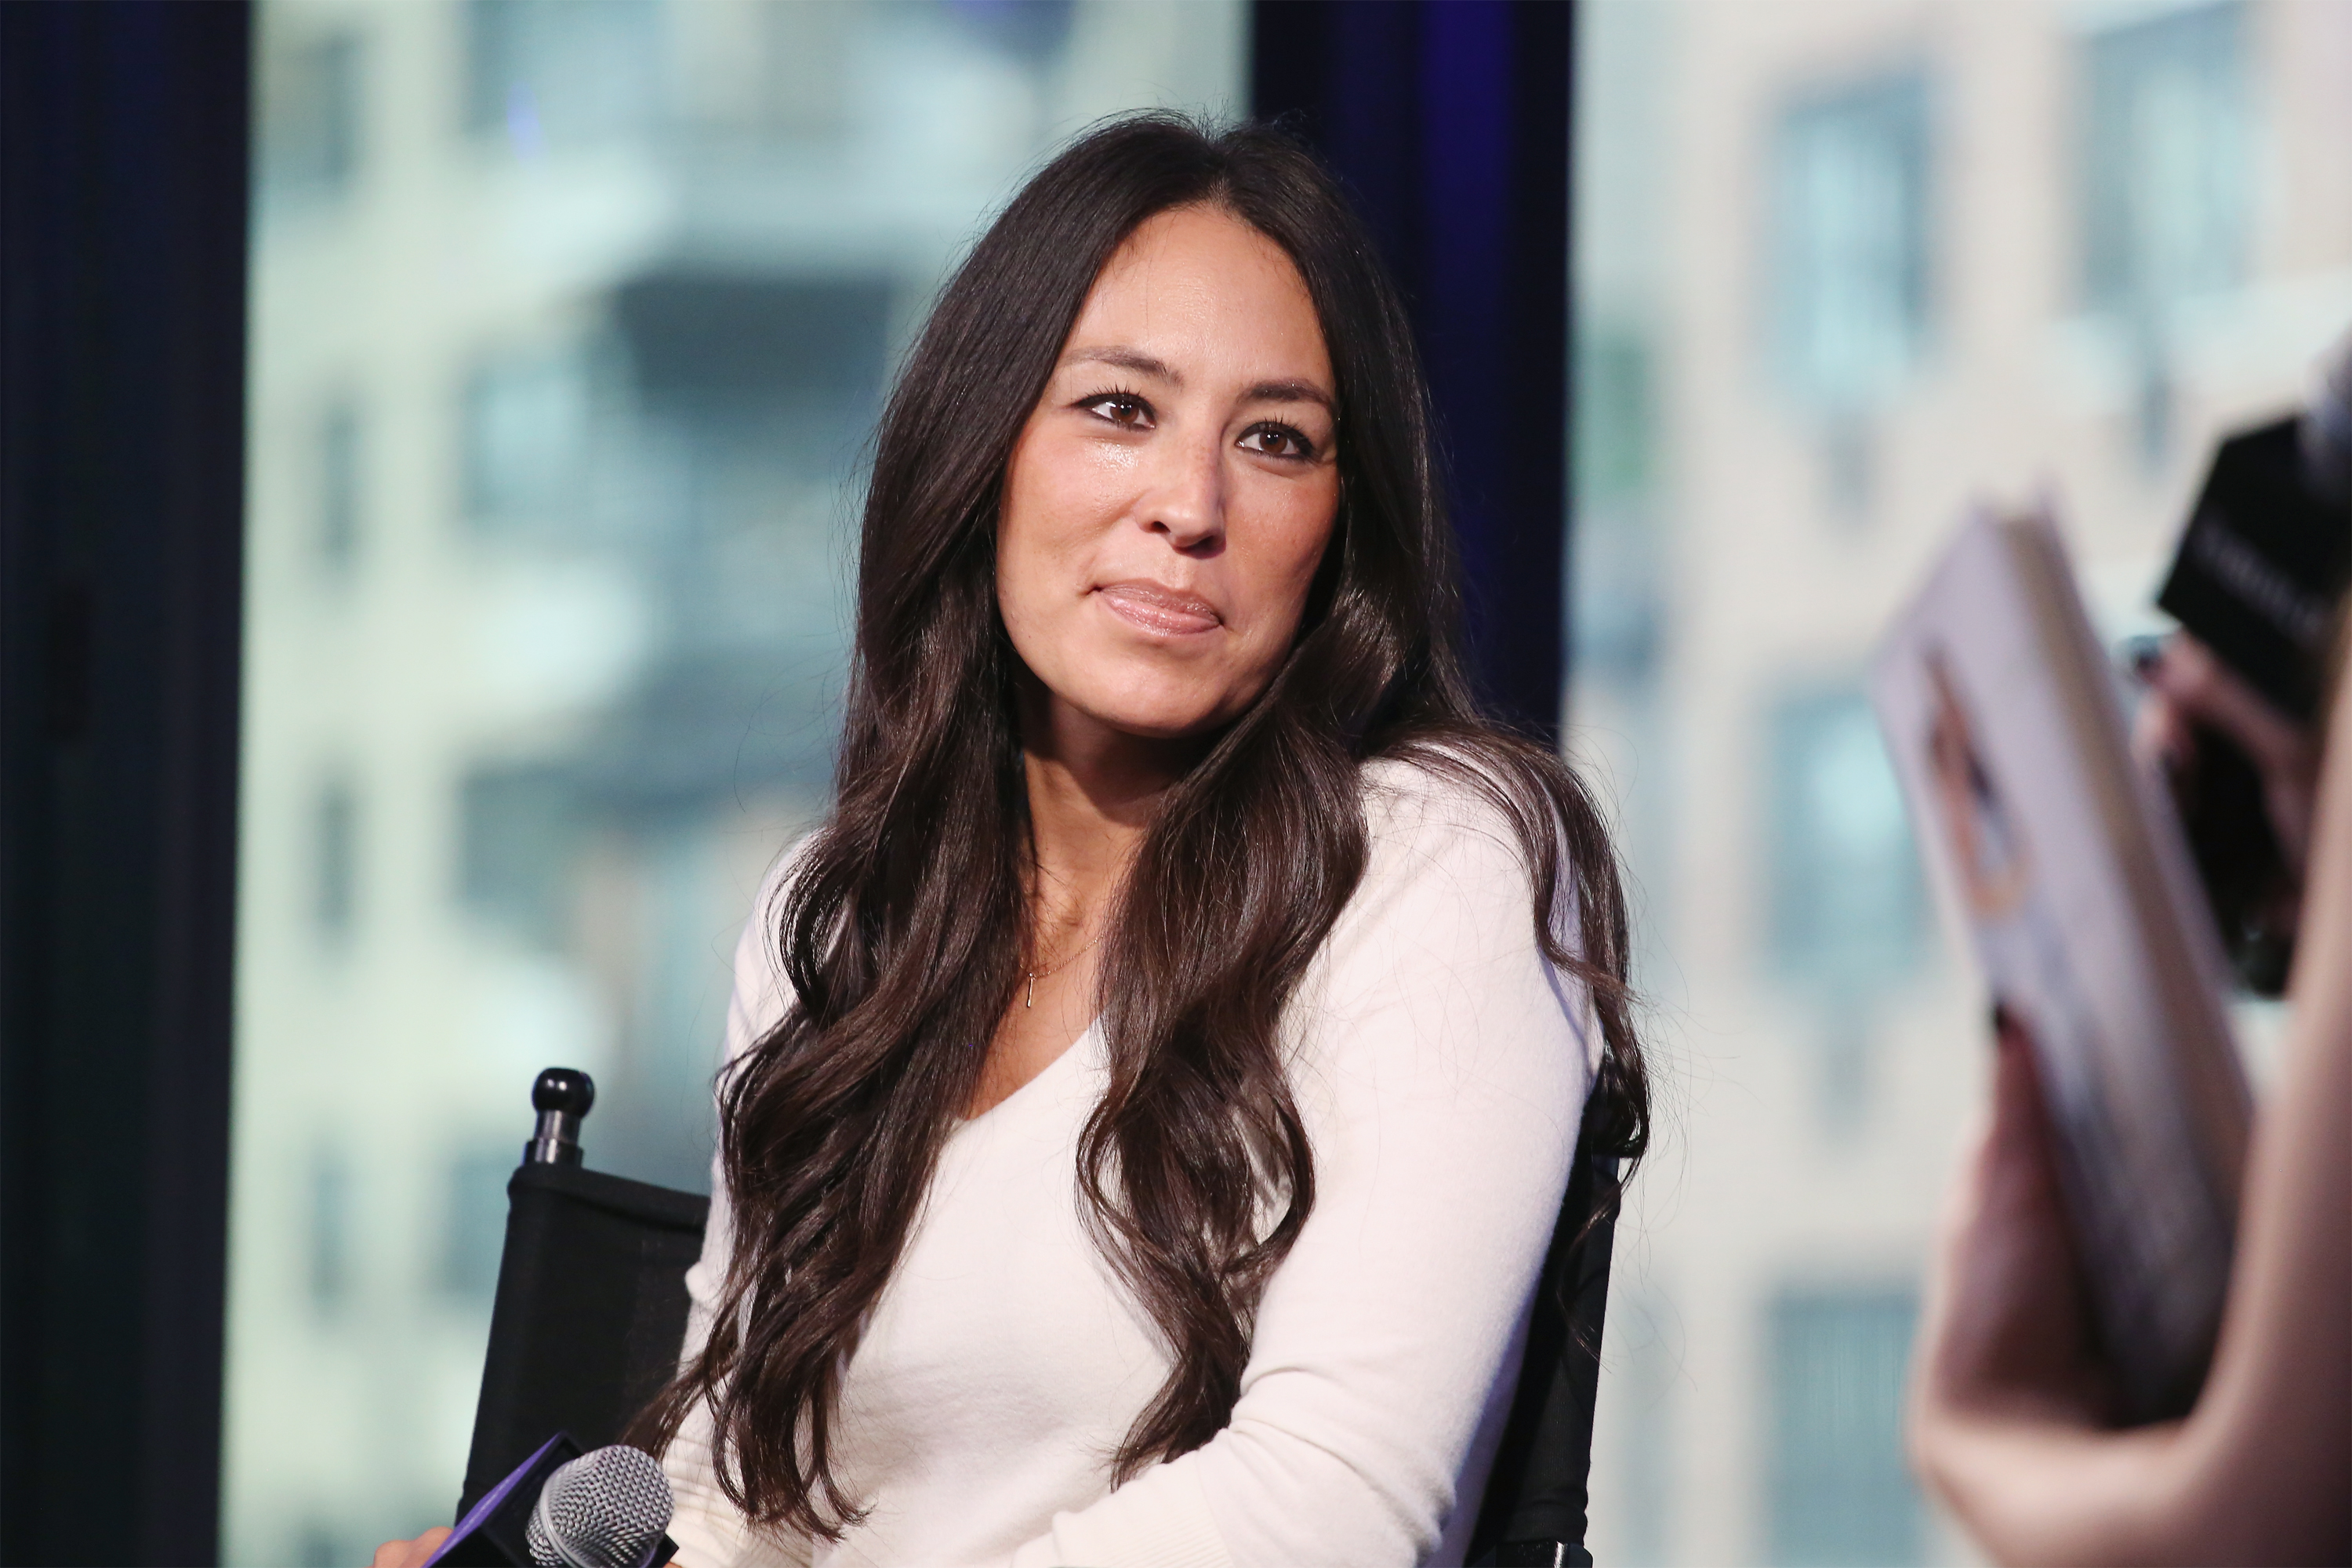 Joanna Gaines in a white top during an interview